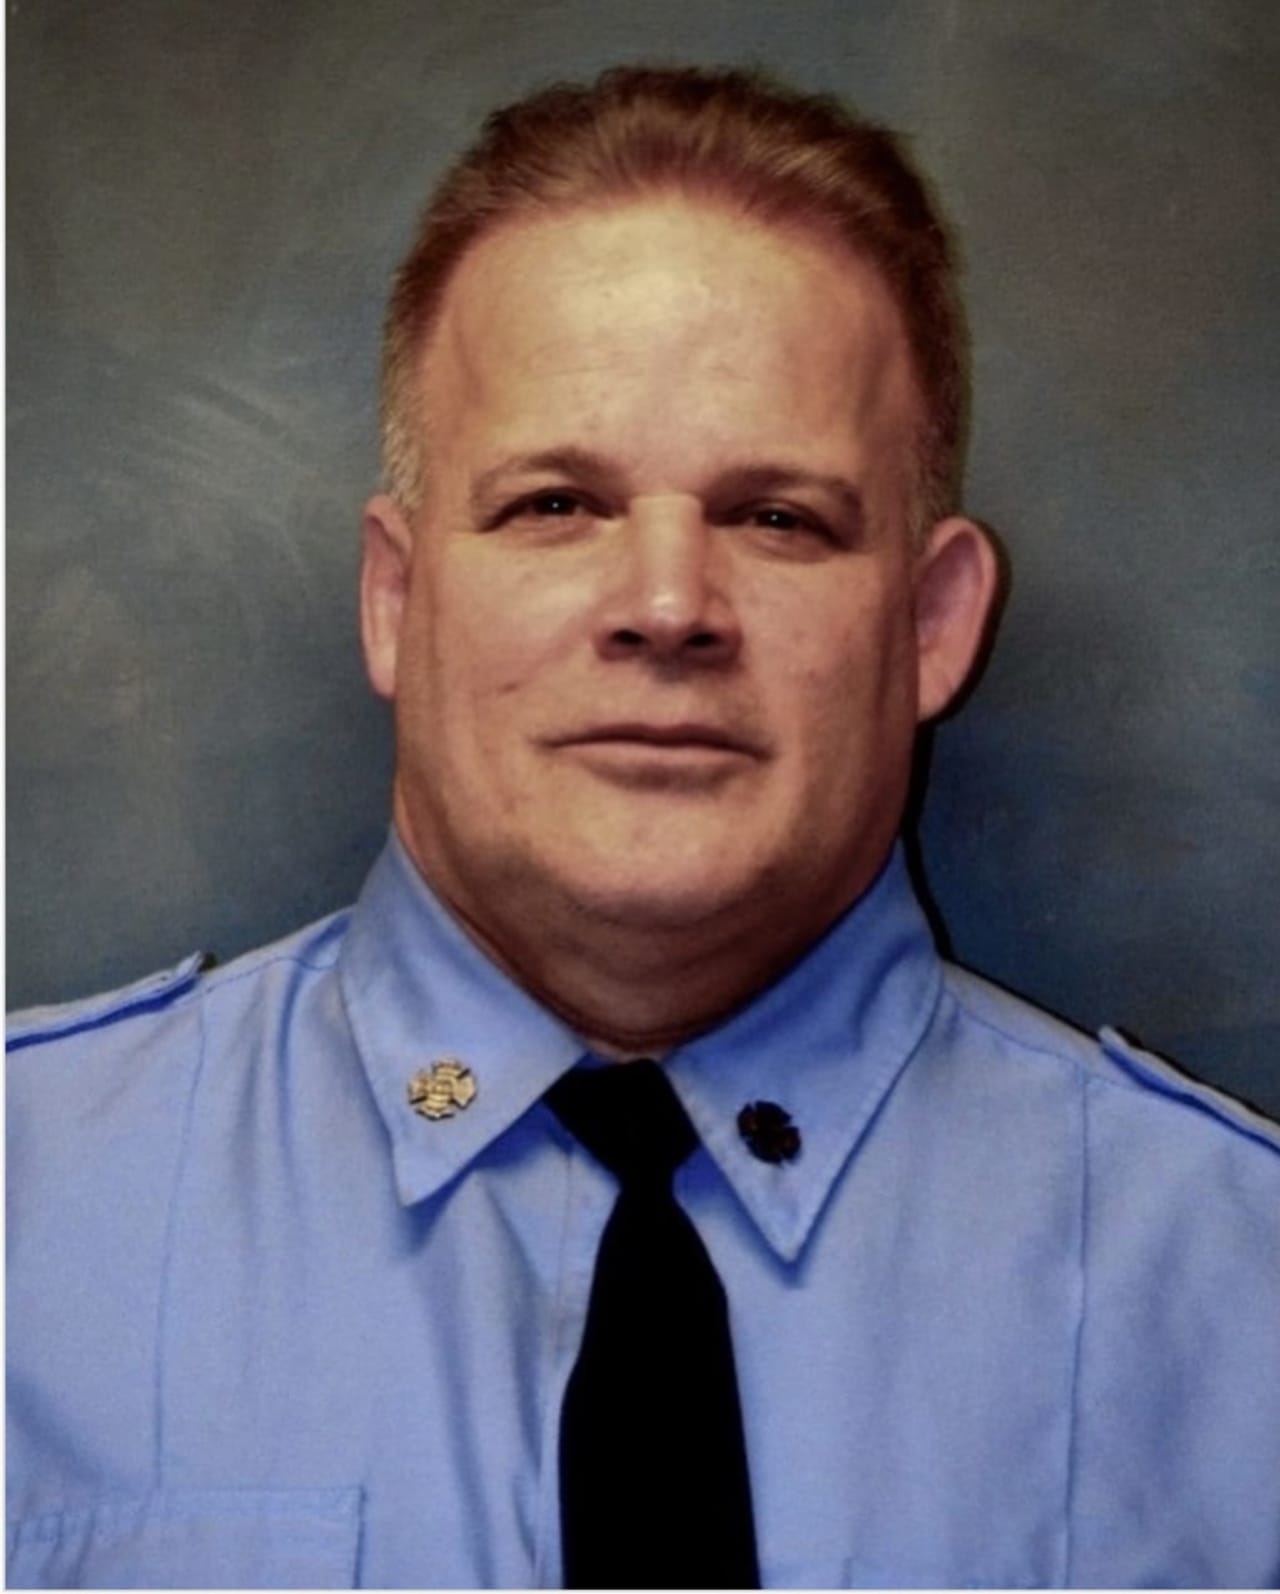 FDNY Firefighter Joseph A. Ferrugia is the department's first active-duty firefighter to die from COVID-19.